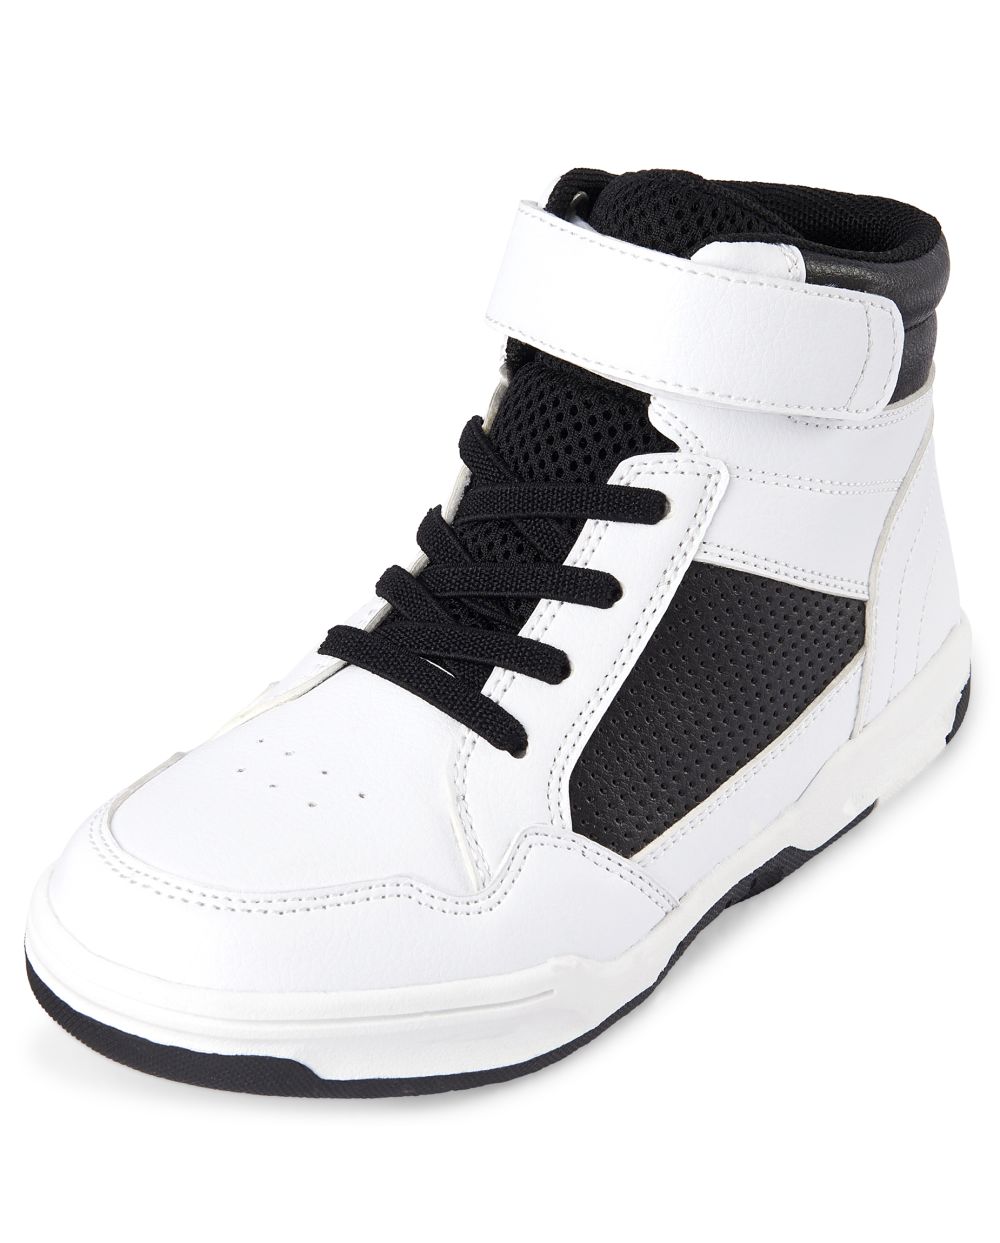 Boys Faux Leather Hi Top Sneakers